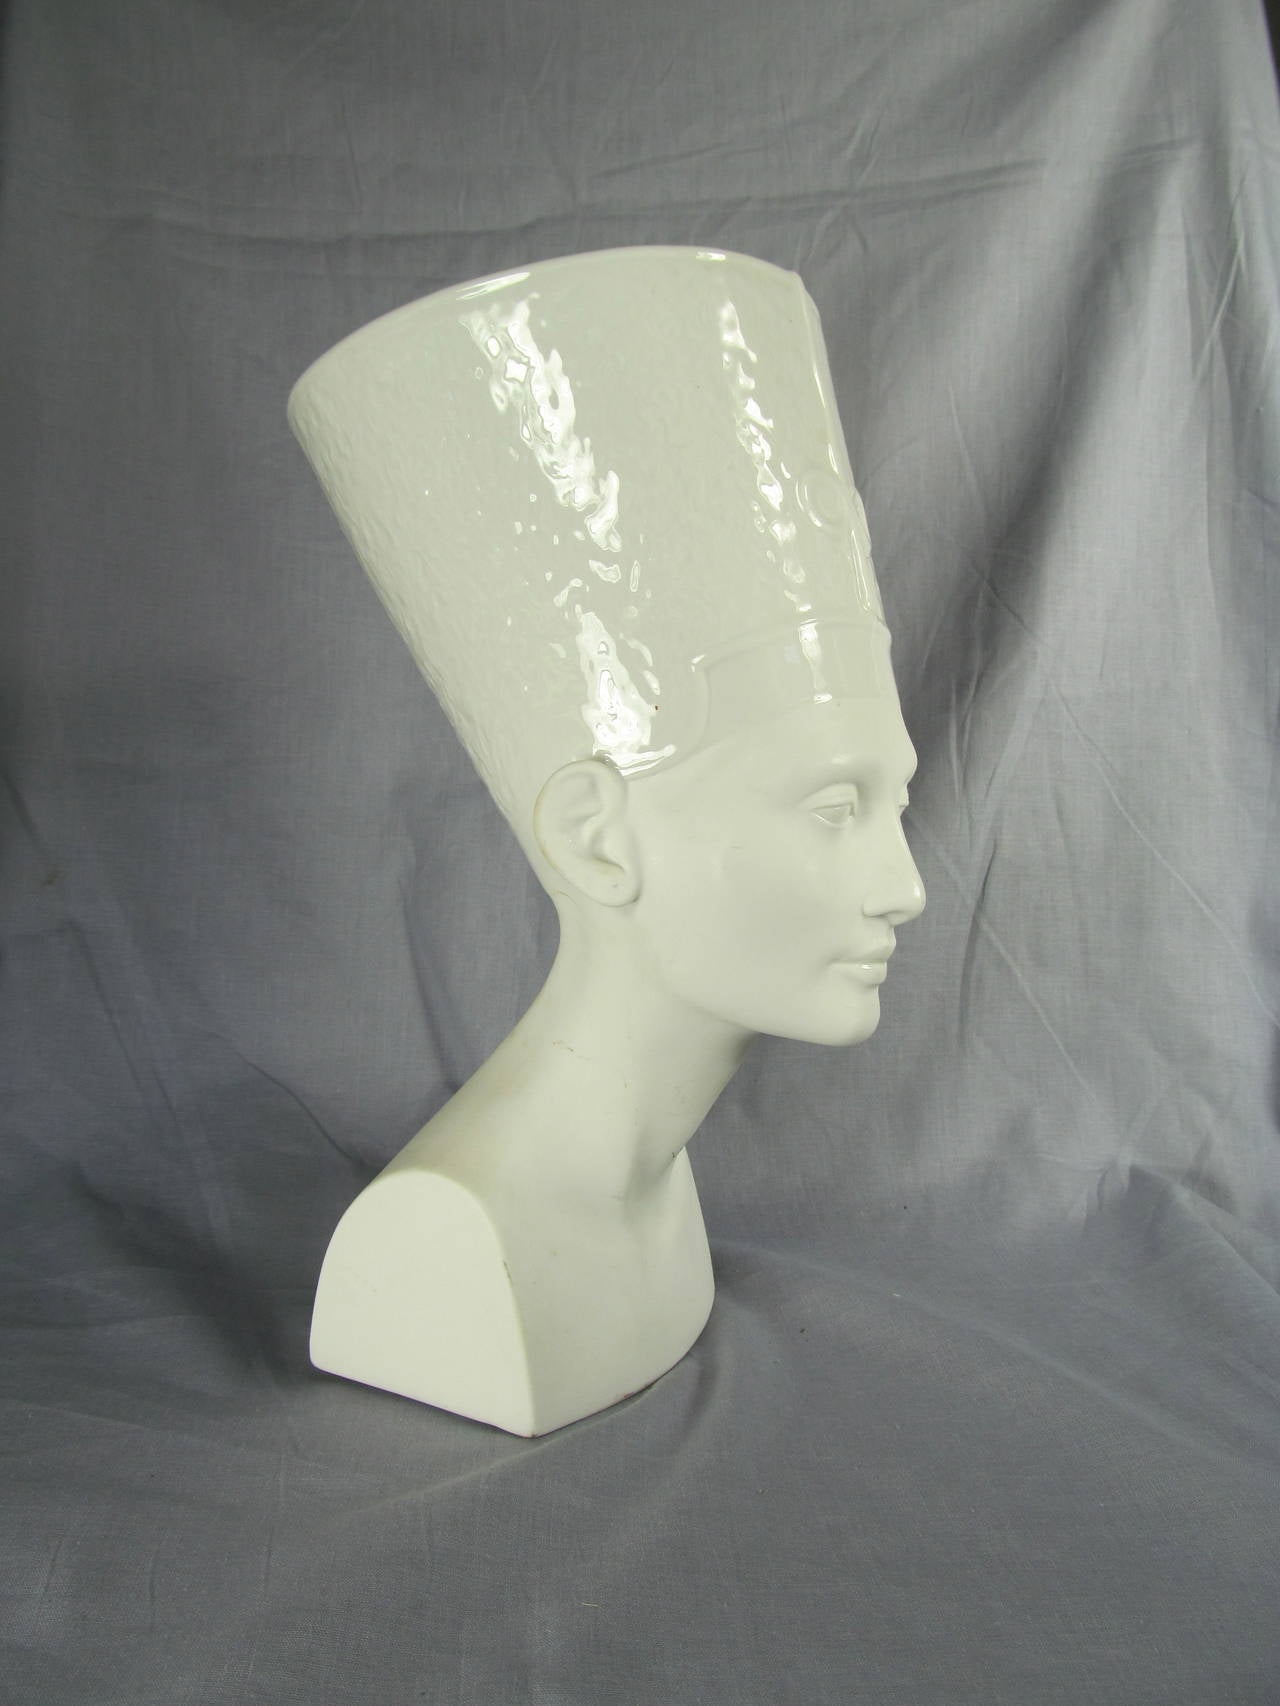 Glazed blanc de chine porcelain bust of Egyptian Queen Nefertiti. 

From the Estate of Mark Lee Kirk, Art Director at 20th Century Fox in the early to mid 1900s.